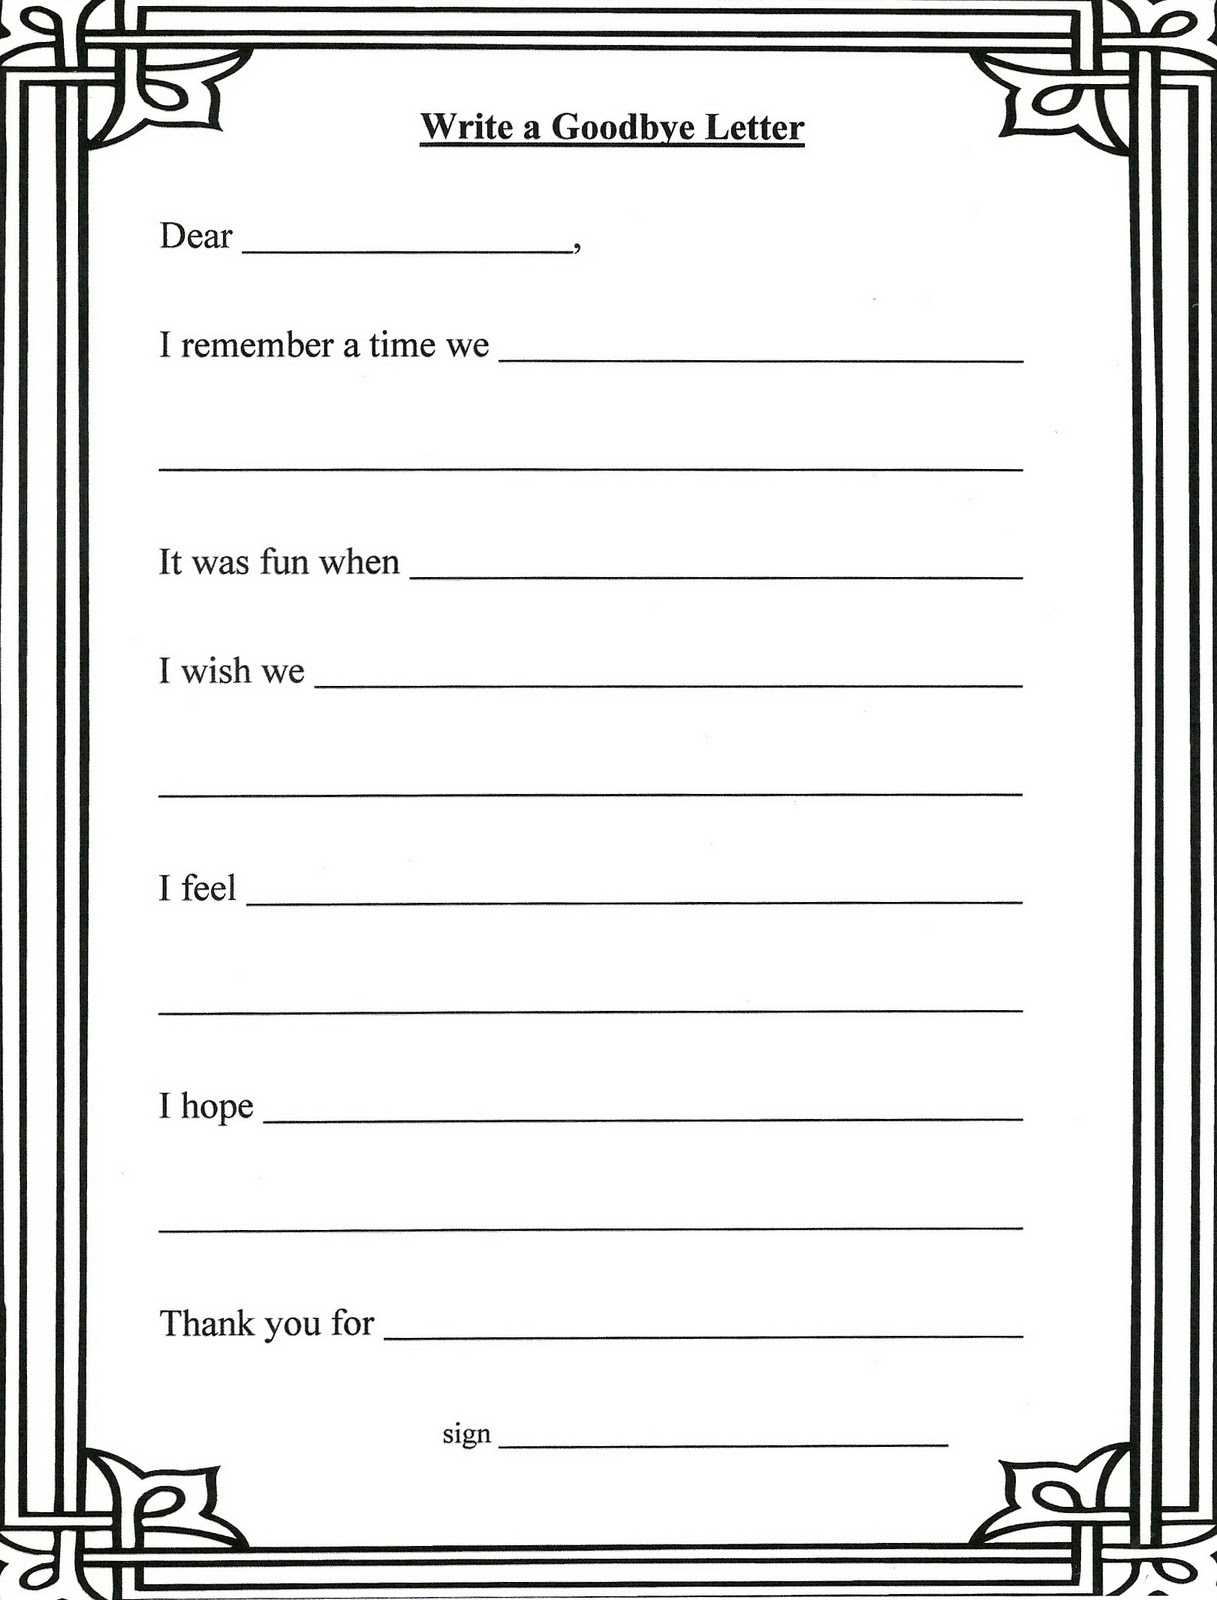 Self Esteem Worksheets Pdf and Grief and Loss Worksheets